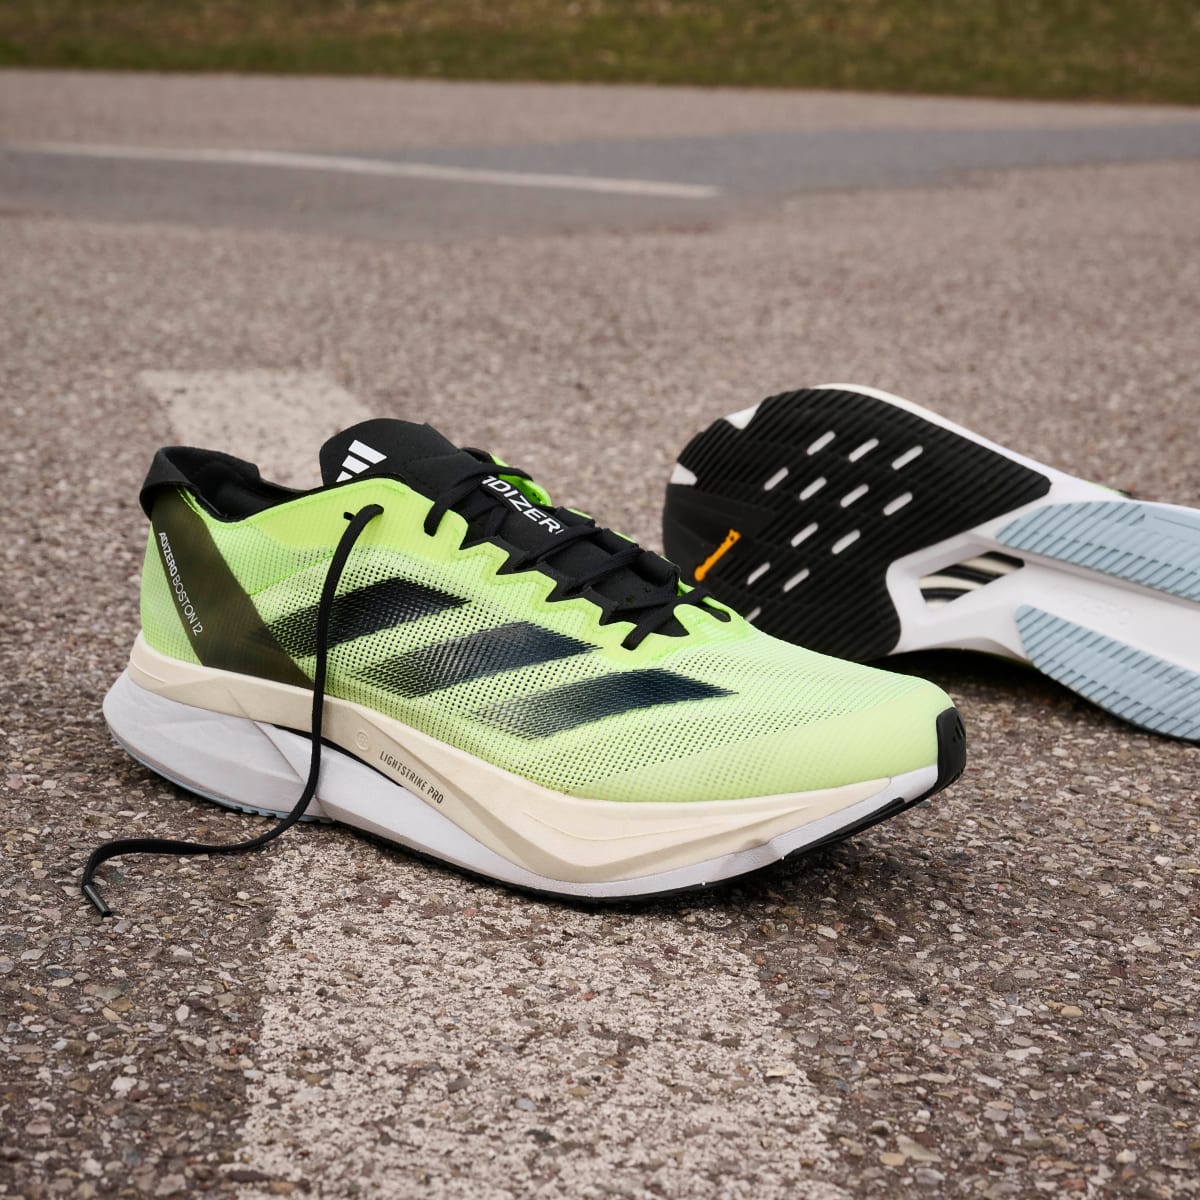 Do expensive running shoes make you faster? 